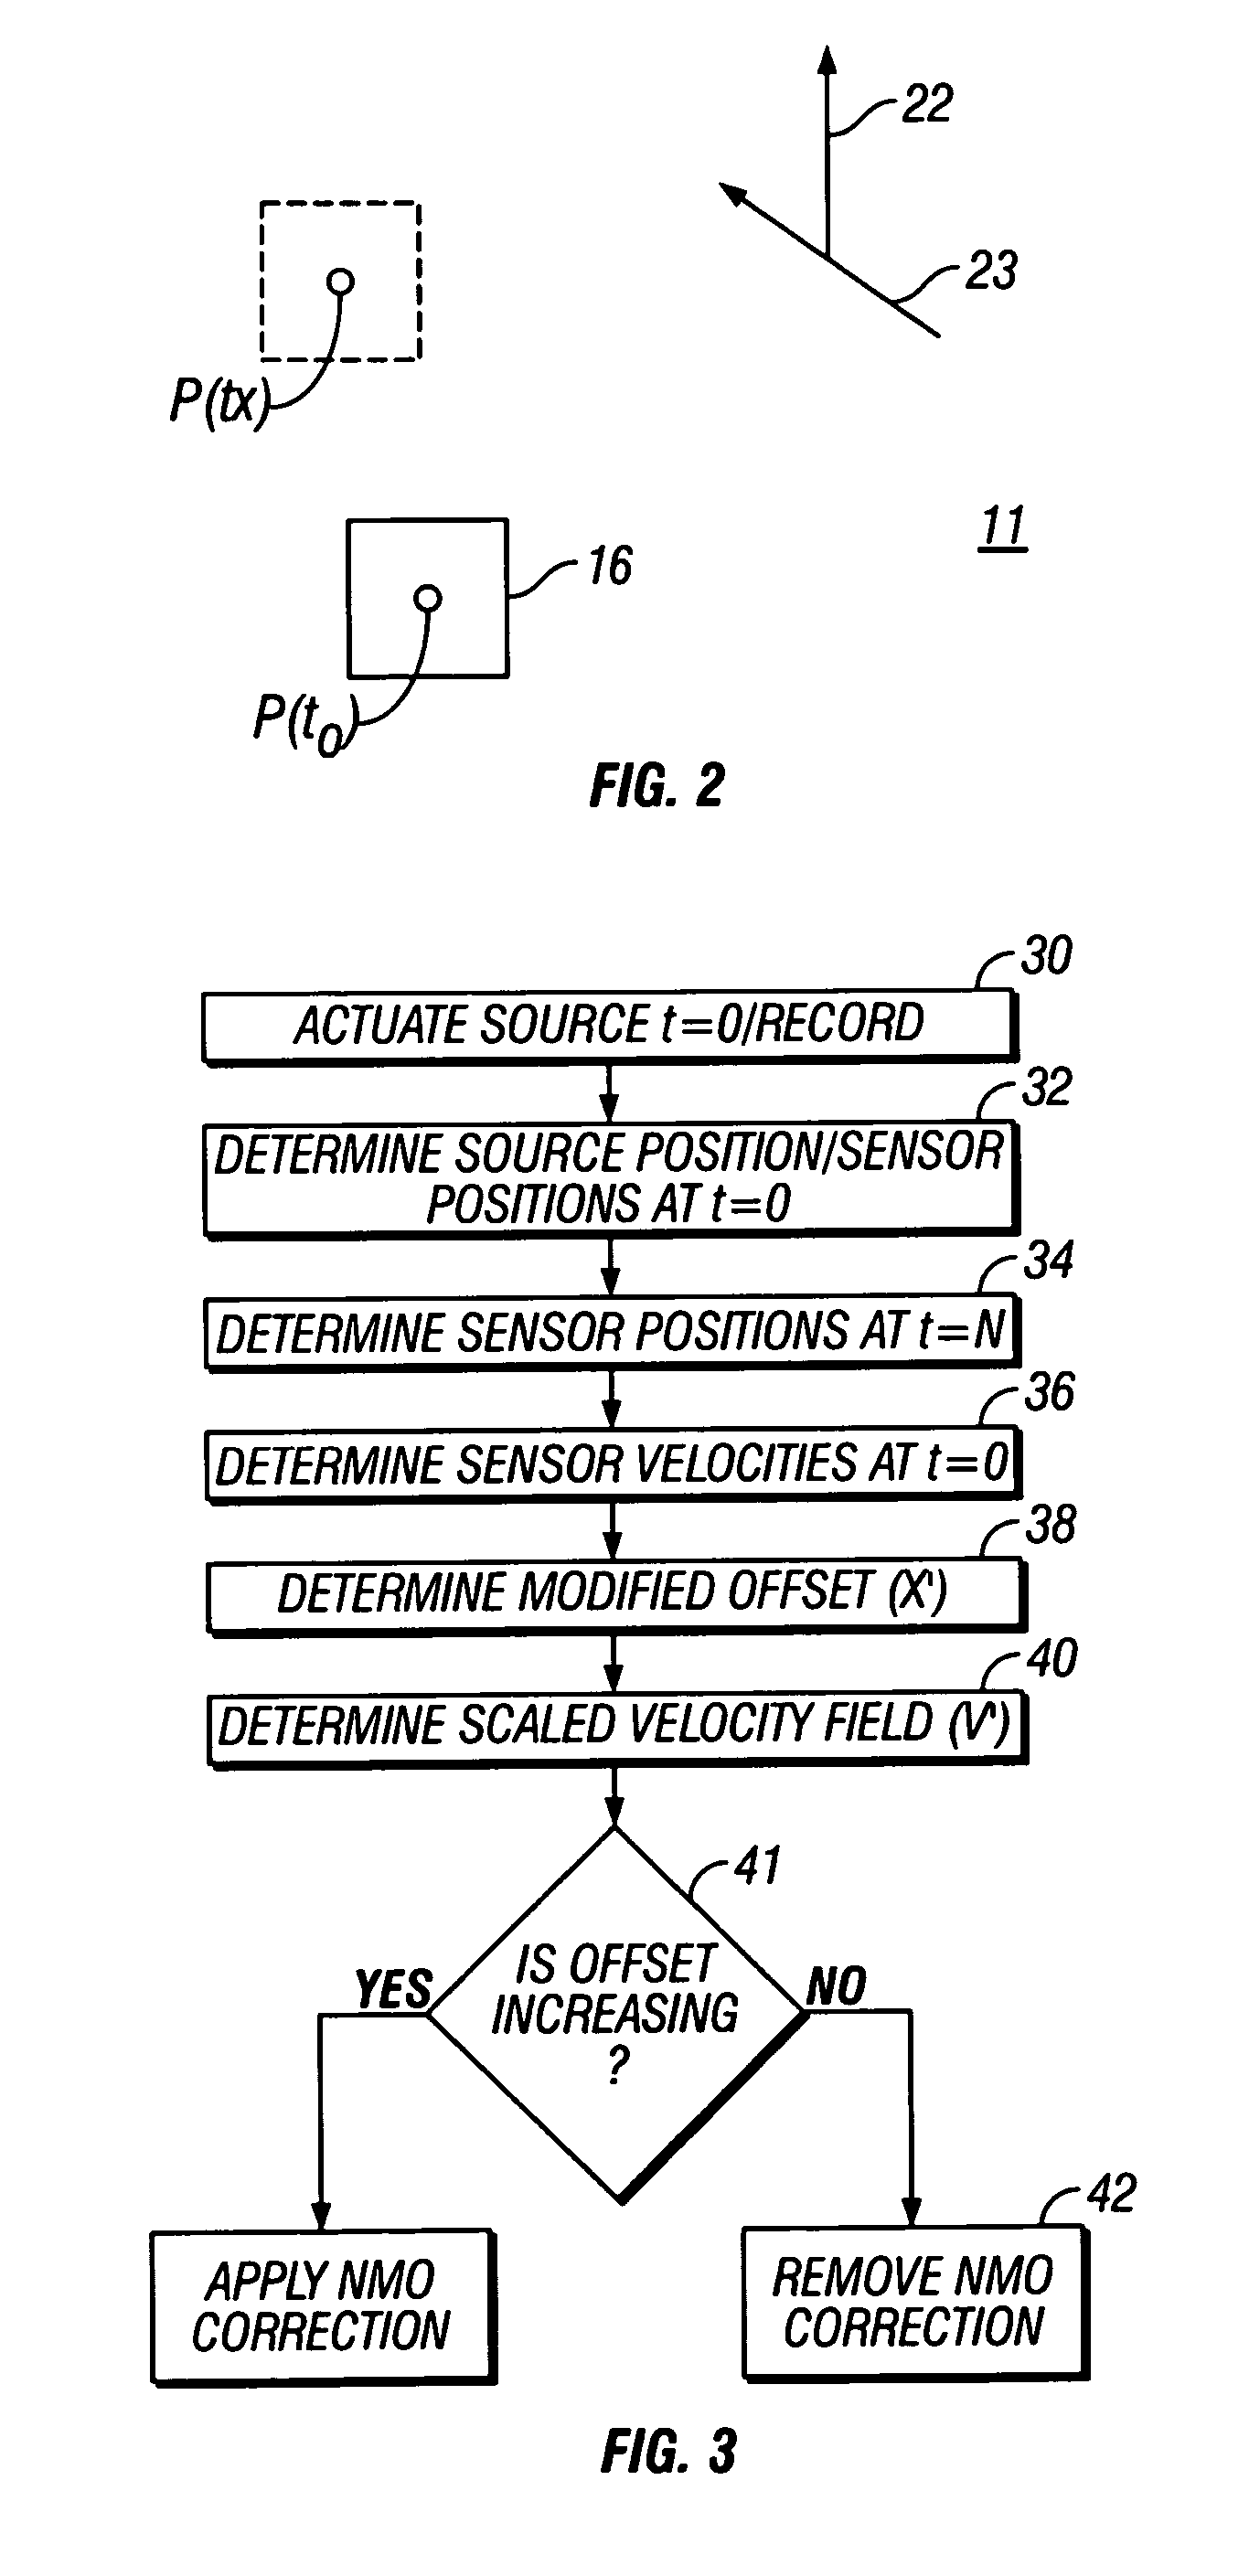 Method for correcting seismic data for receiver movement during data acquisition